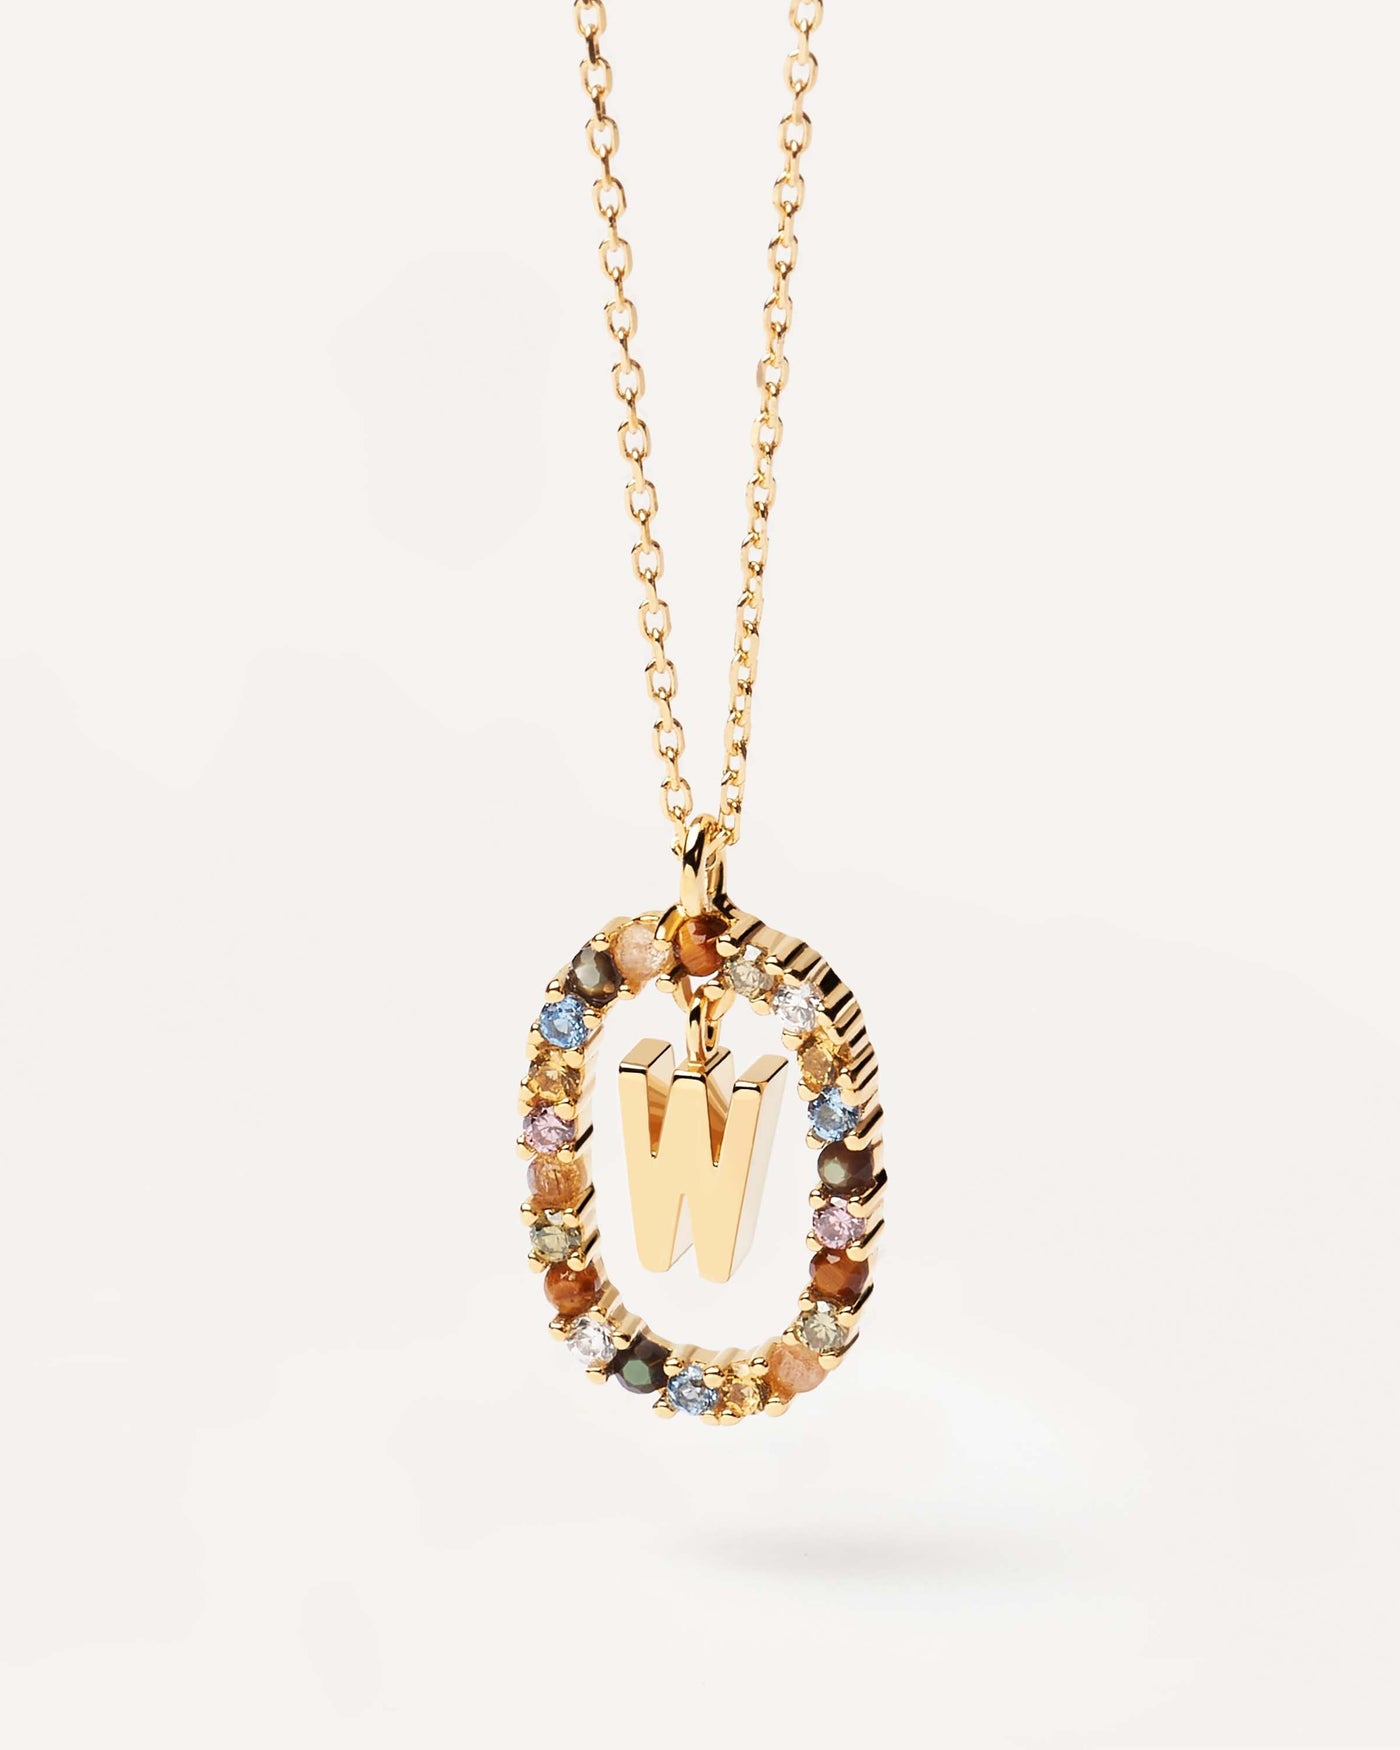 2023 Selection | Letter W necklace. Initial W necklace in gold-plated silver, circled by colorful gemstones. Get the latest arrival from PDPAOLA. Place your order safely and get this Best Seller. Free Shipping.